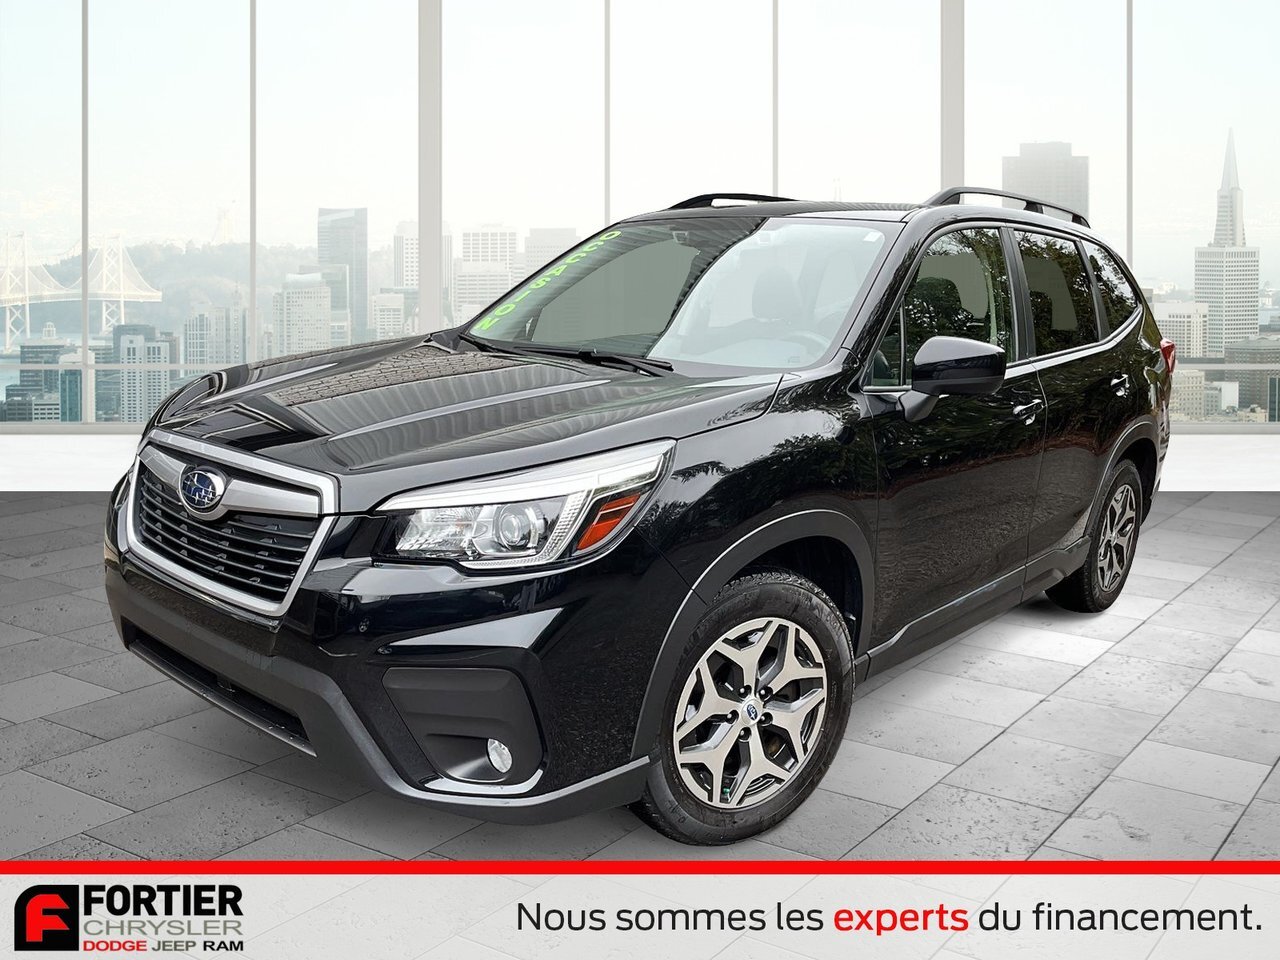 2020 Subaru Forester TOURING + AWD + TOIT OUVRANT PANORAMIQUE HEATED SE